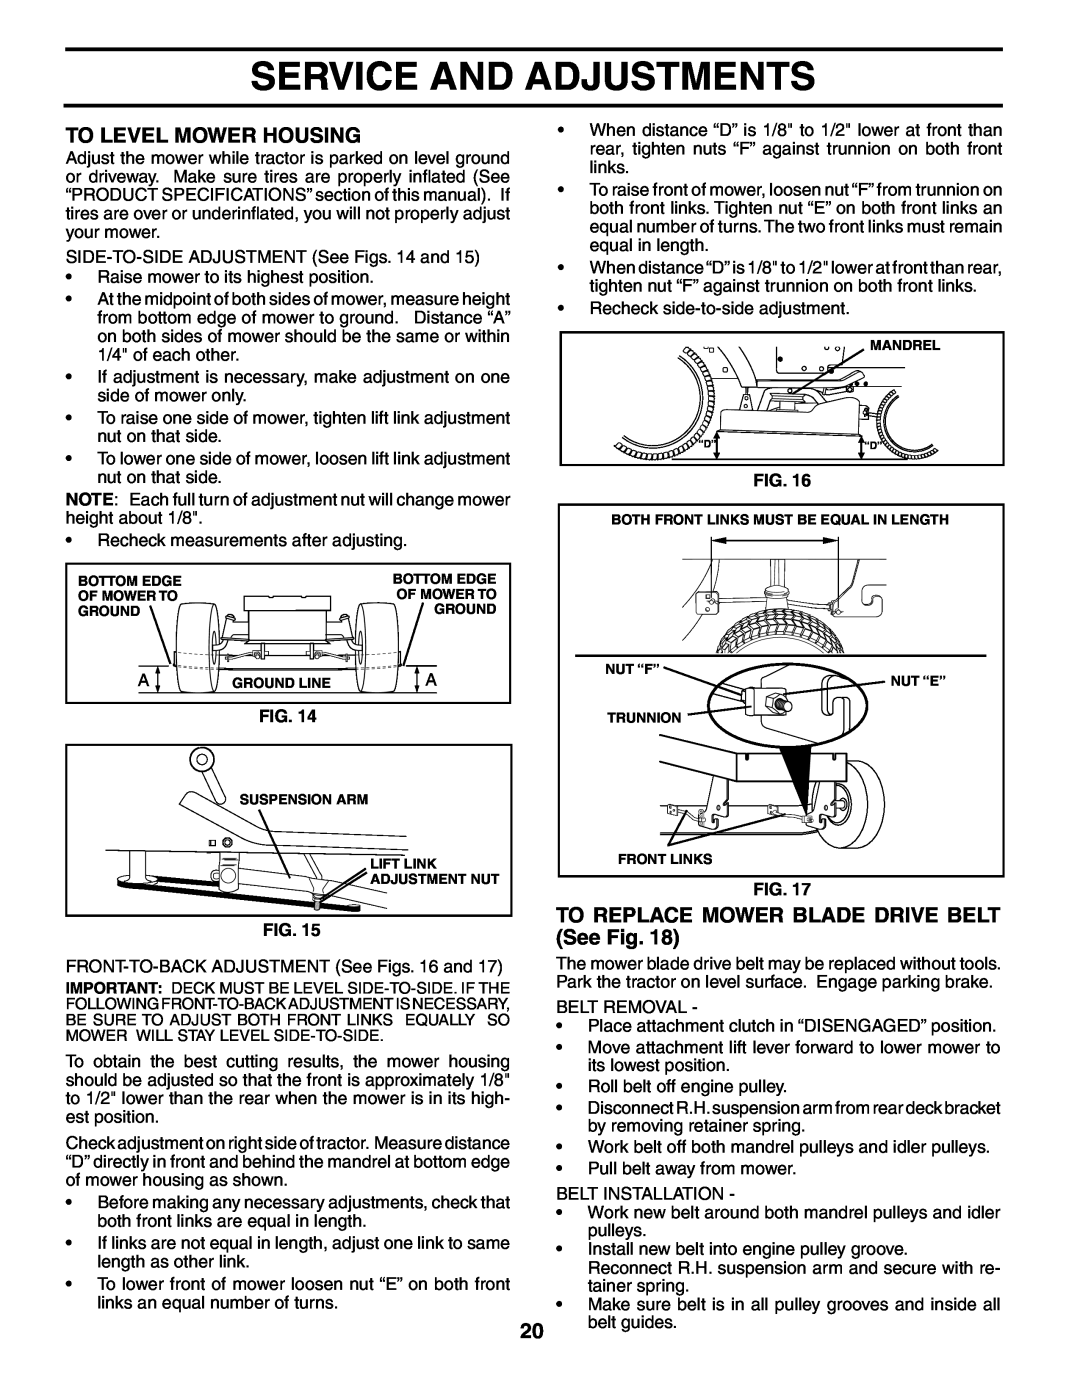 Weed Eater WE13538LT, 195013 To Level Mower Housing, TO REPLACE MOWER BLADE DRIVE BELT See Fig, Service And Adjustments 